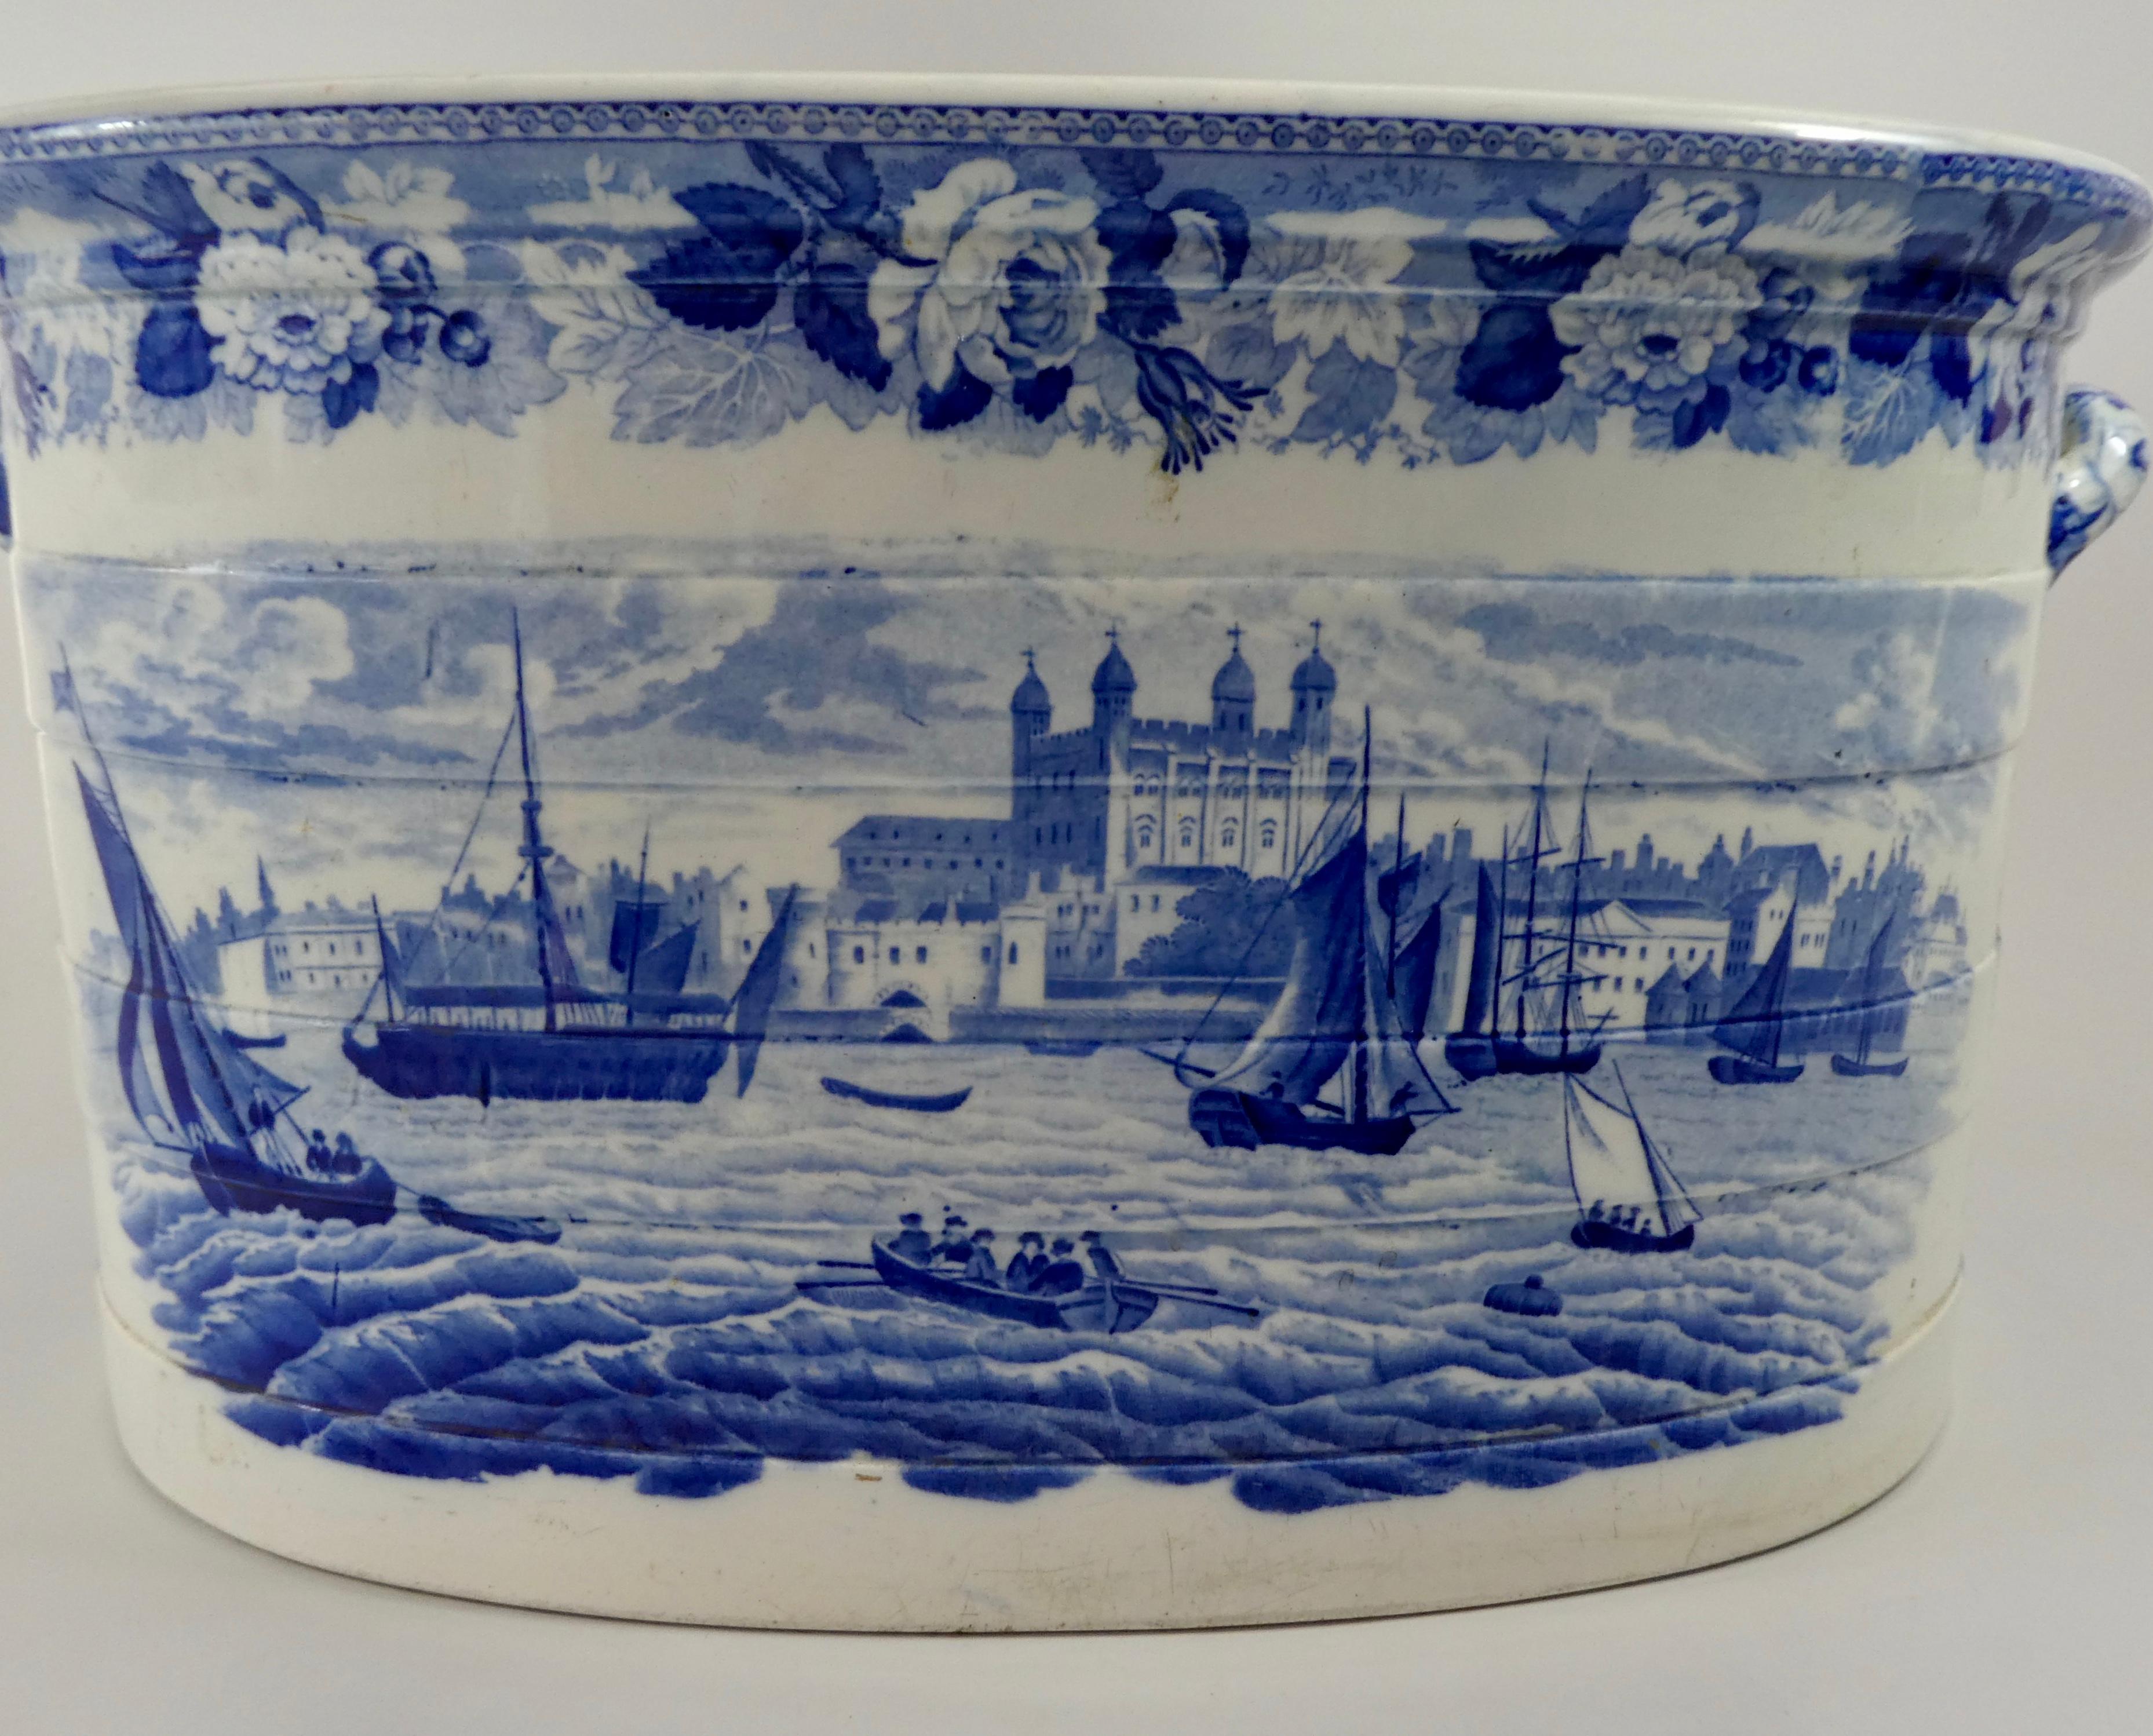 A fine and rare Wedgwood pottery foot bath, c. 1820. The foot bath moulded with bands, and printed in underglaze blue with views of the Tower of London and Traitors Gate, from the River Thames, beneath a Wild Rose border. Having twin handles, above